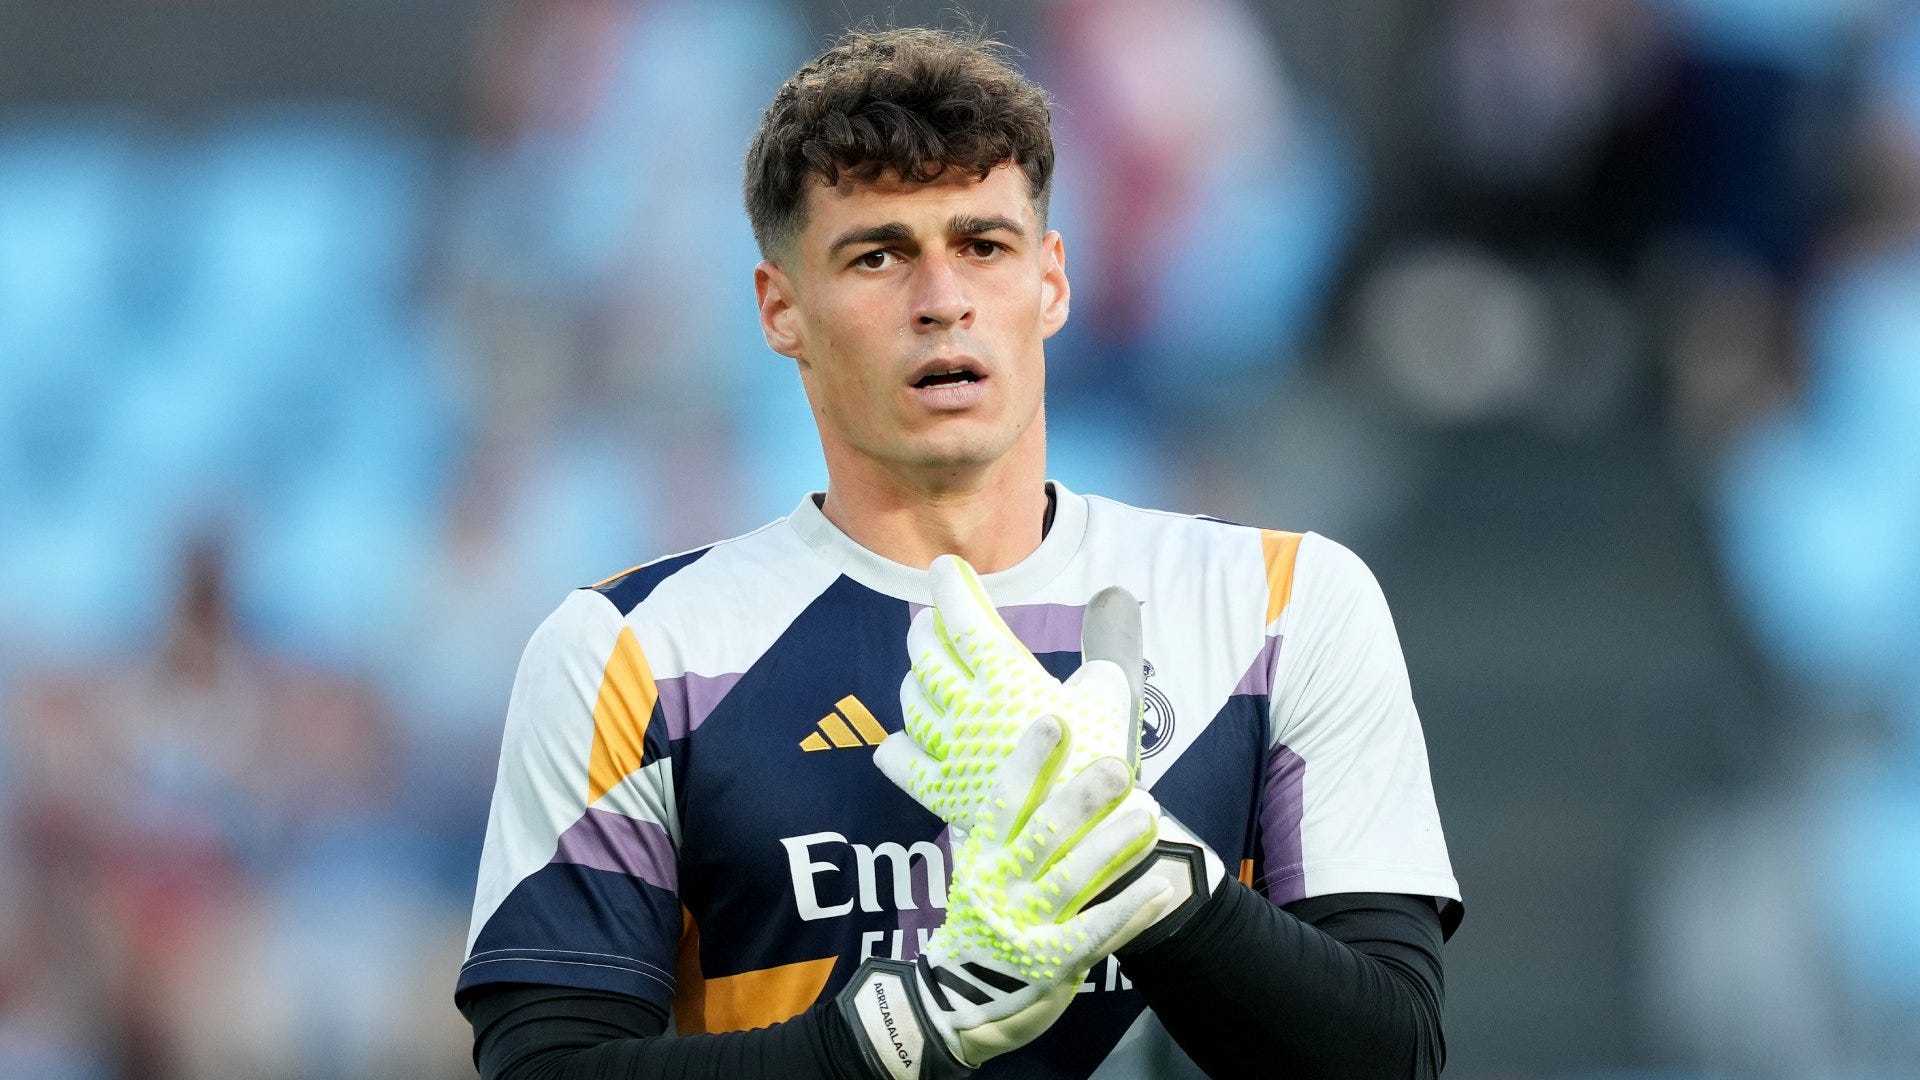 kepa-arrizabalaga-s-future-uncertain-as-real-madrid-unlikely-to-sign-goalkeeper-on-permanent-basis-from-chelsea-or-goal-com-india